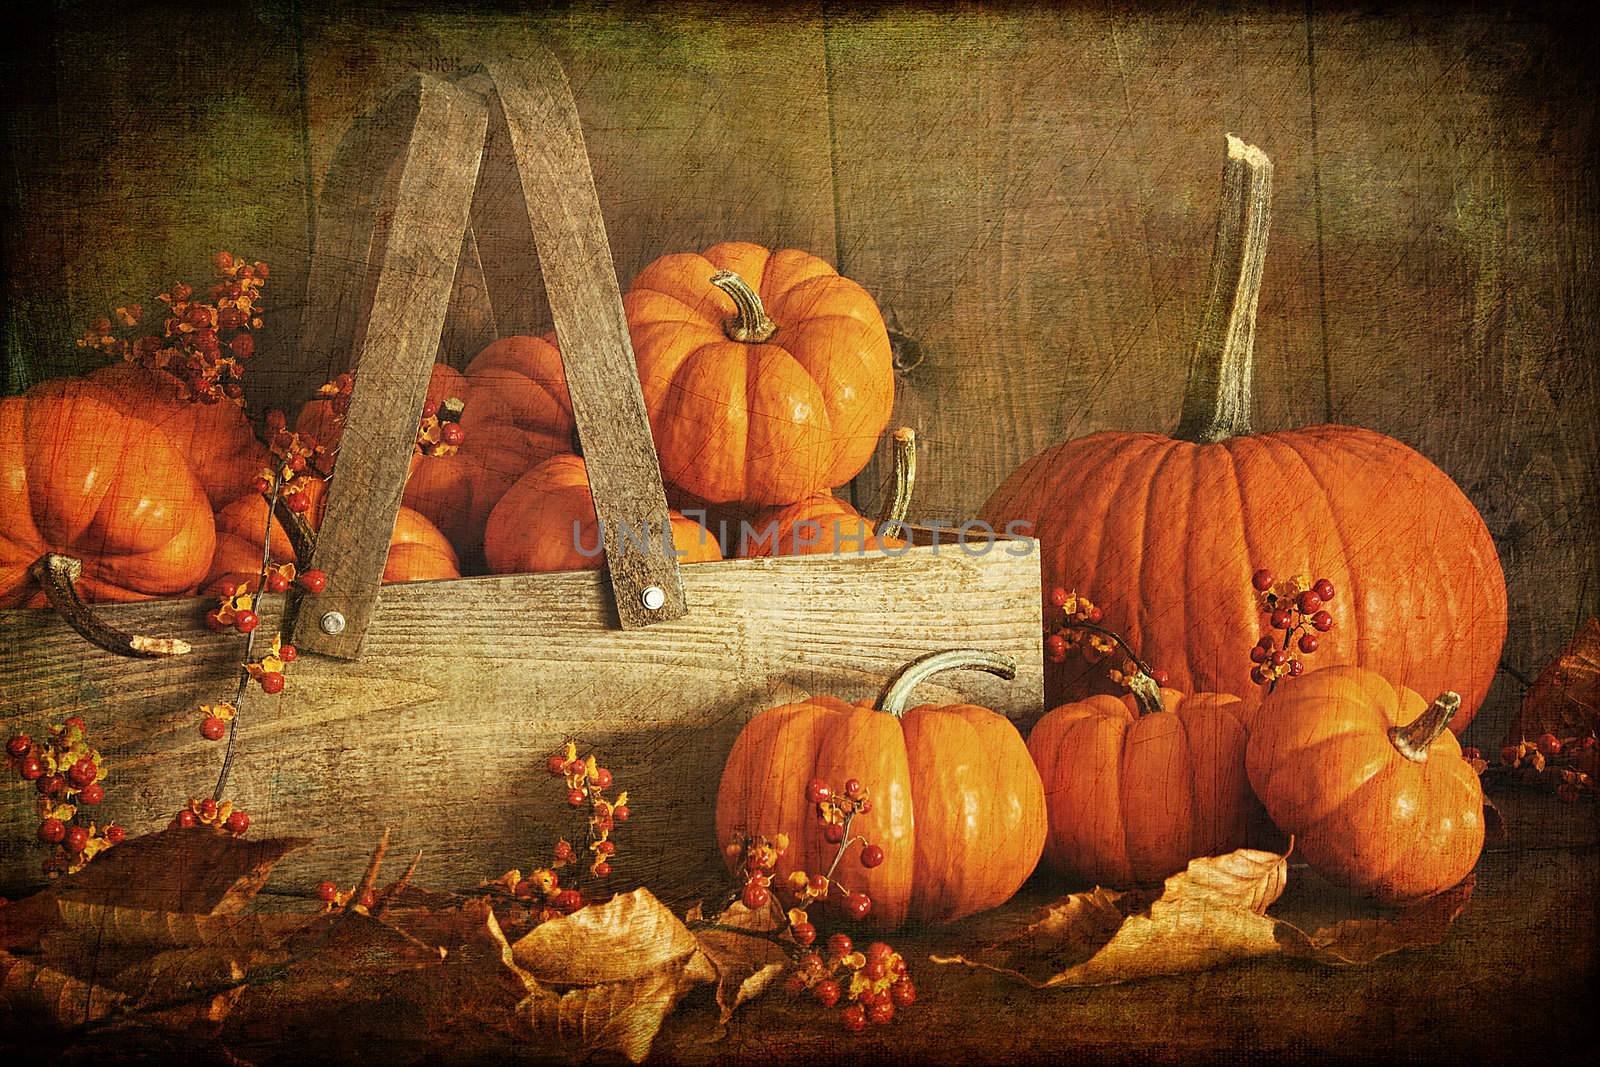 Colorful pumpkins with dark wood background